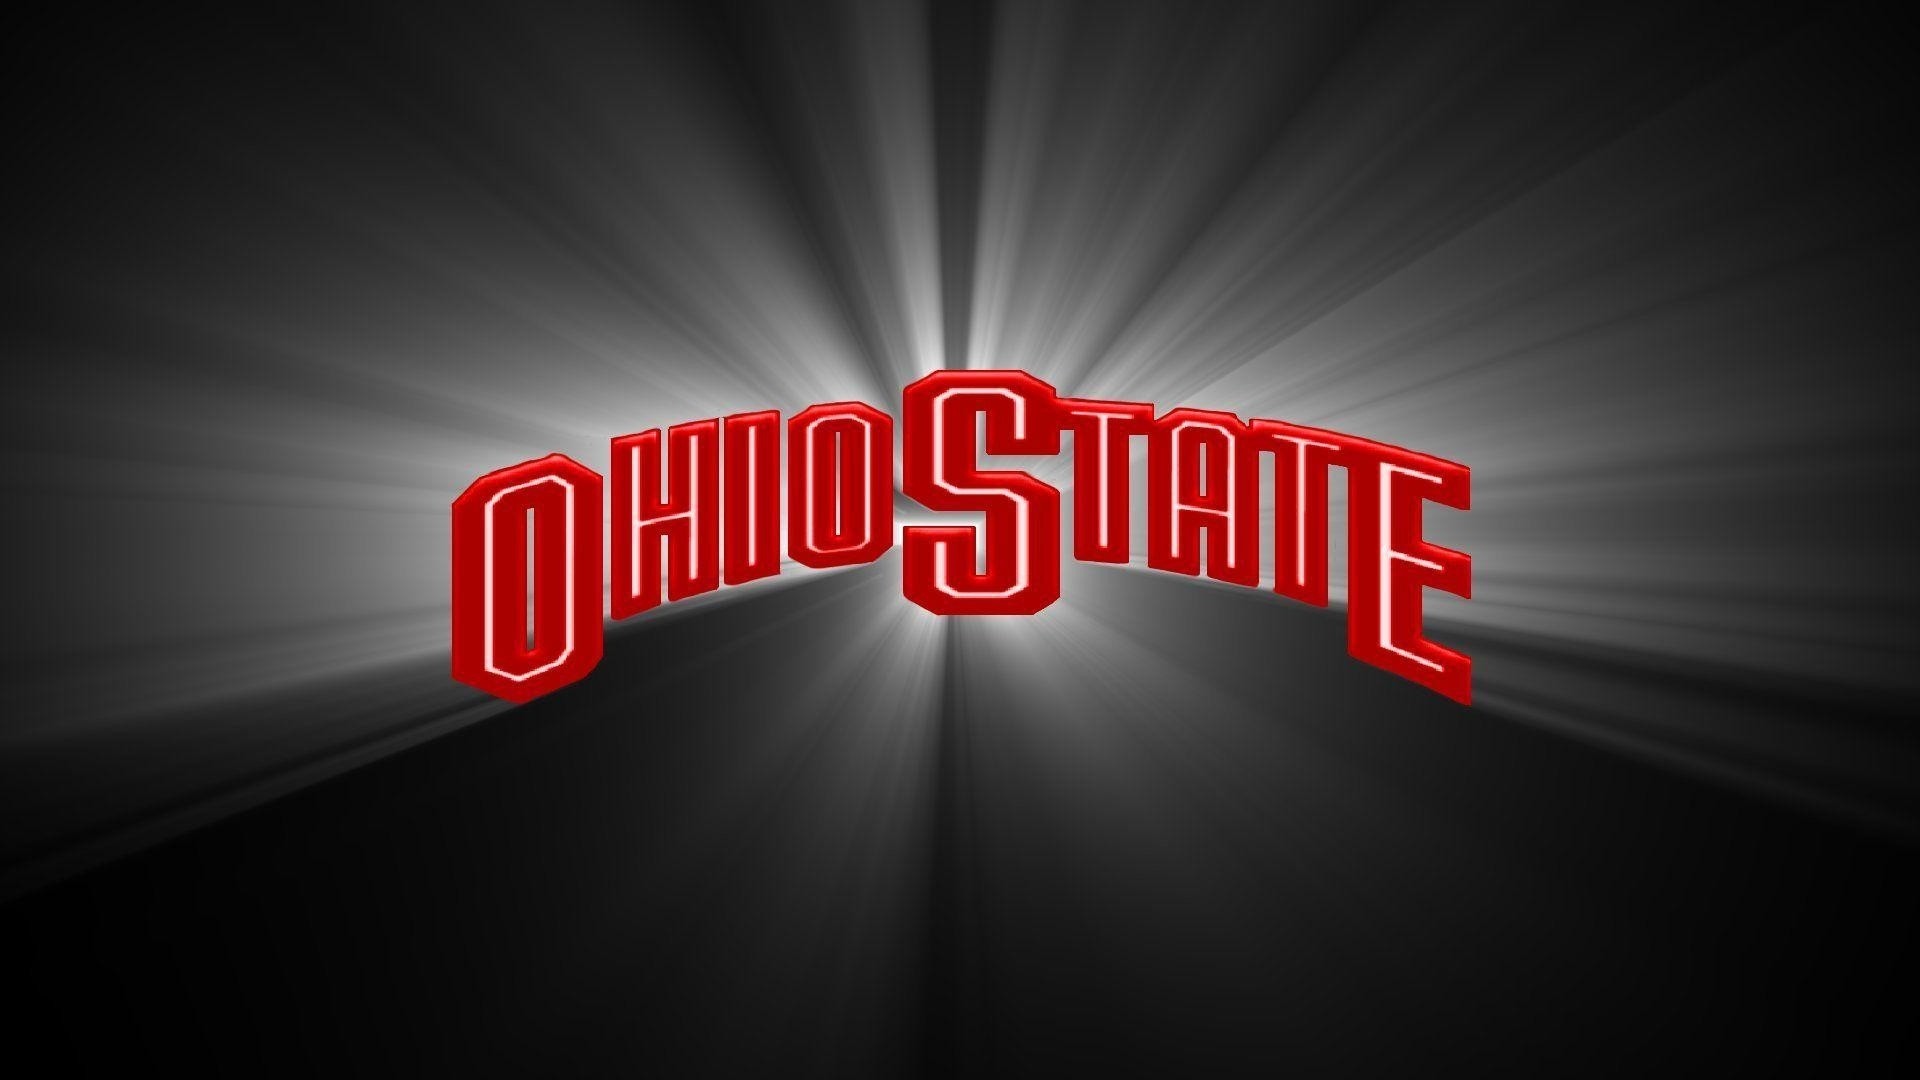 1920x1080 Title : ohio state buckeyes football wallpapers – wallpaper cave. Dimension  : 1920 x 1080. File Type : JPG/JPEG